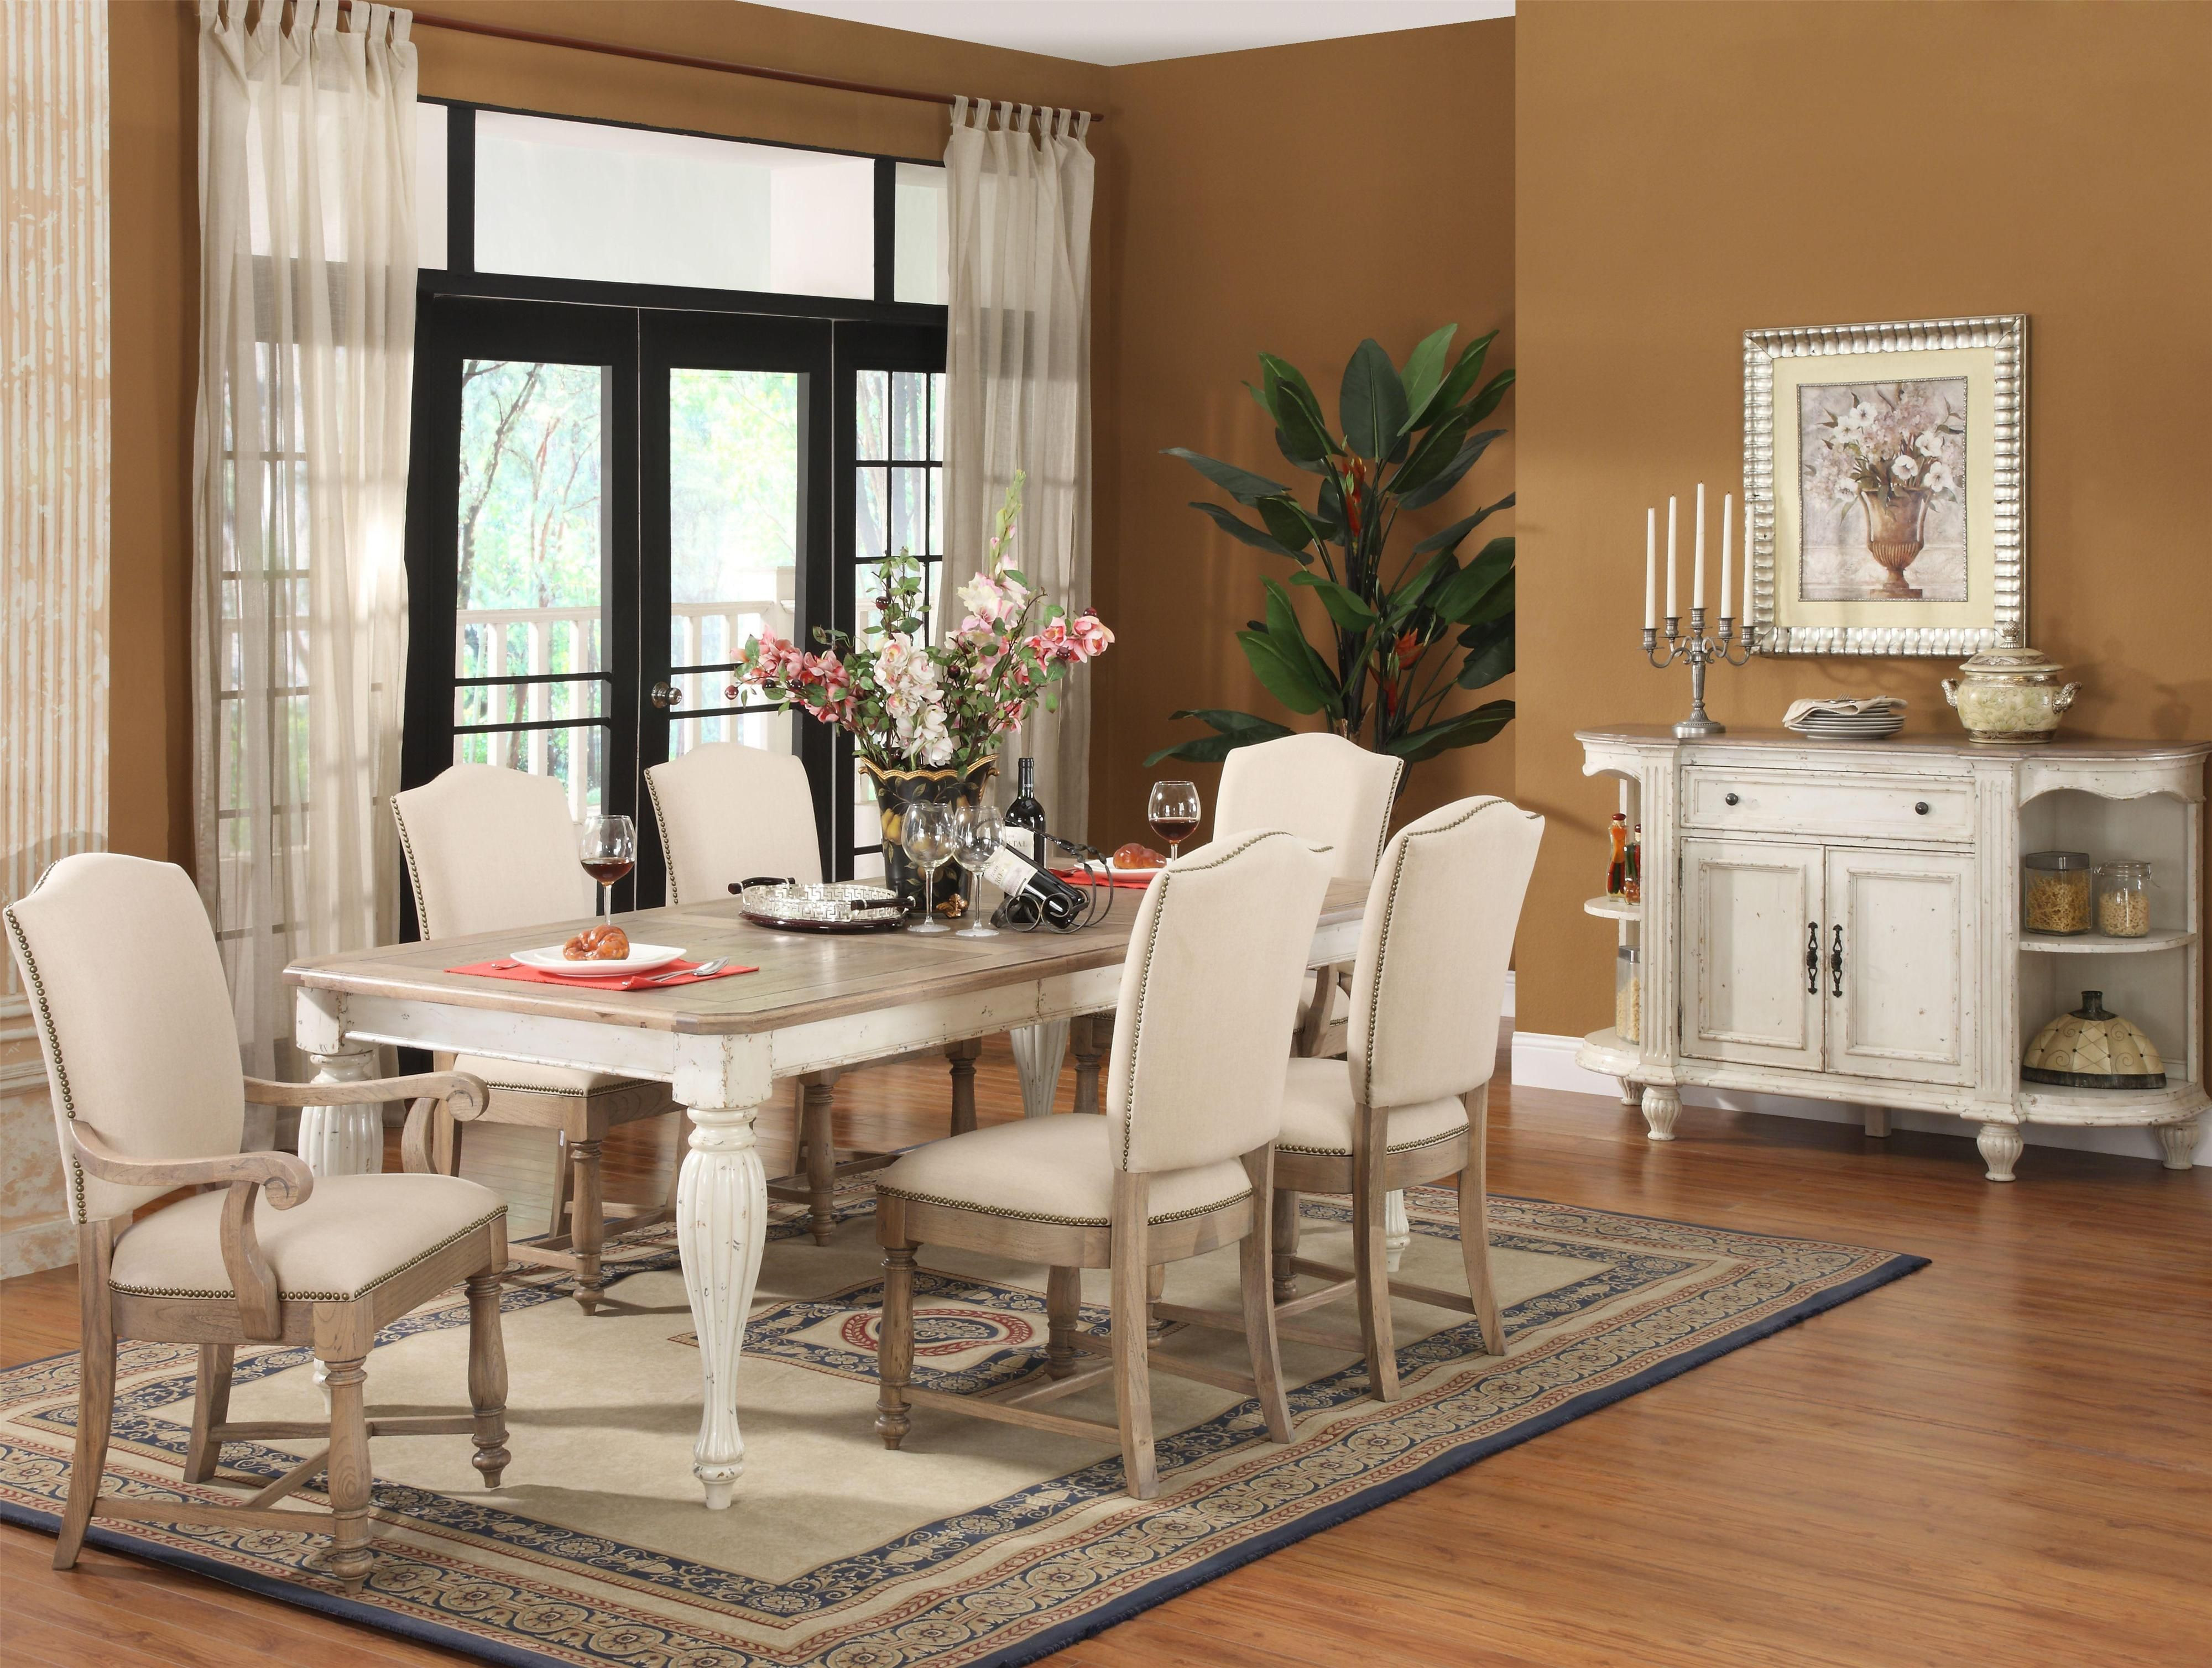 22 attractive Pc Hardwood Floors Danbury 2024 free download pc hardwood floors danbury of coventry two tone rectangular leg dining table with 18 leaf by intended for coventry two tone rectangular leg dining table with 18 leaf by riverside furniture s